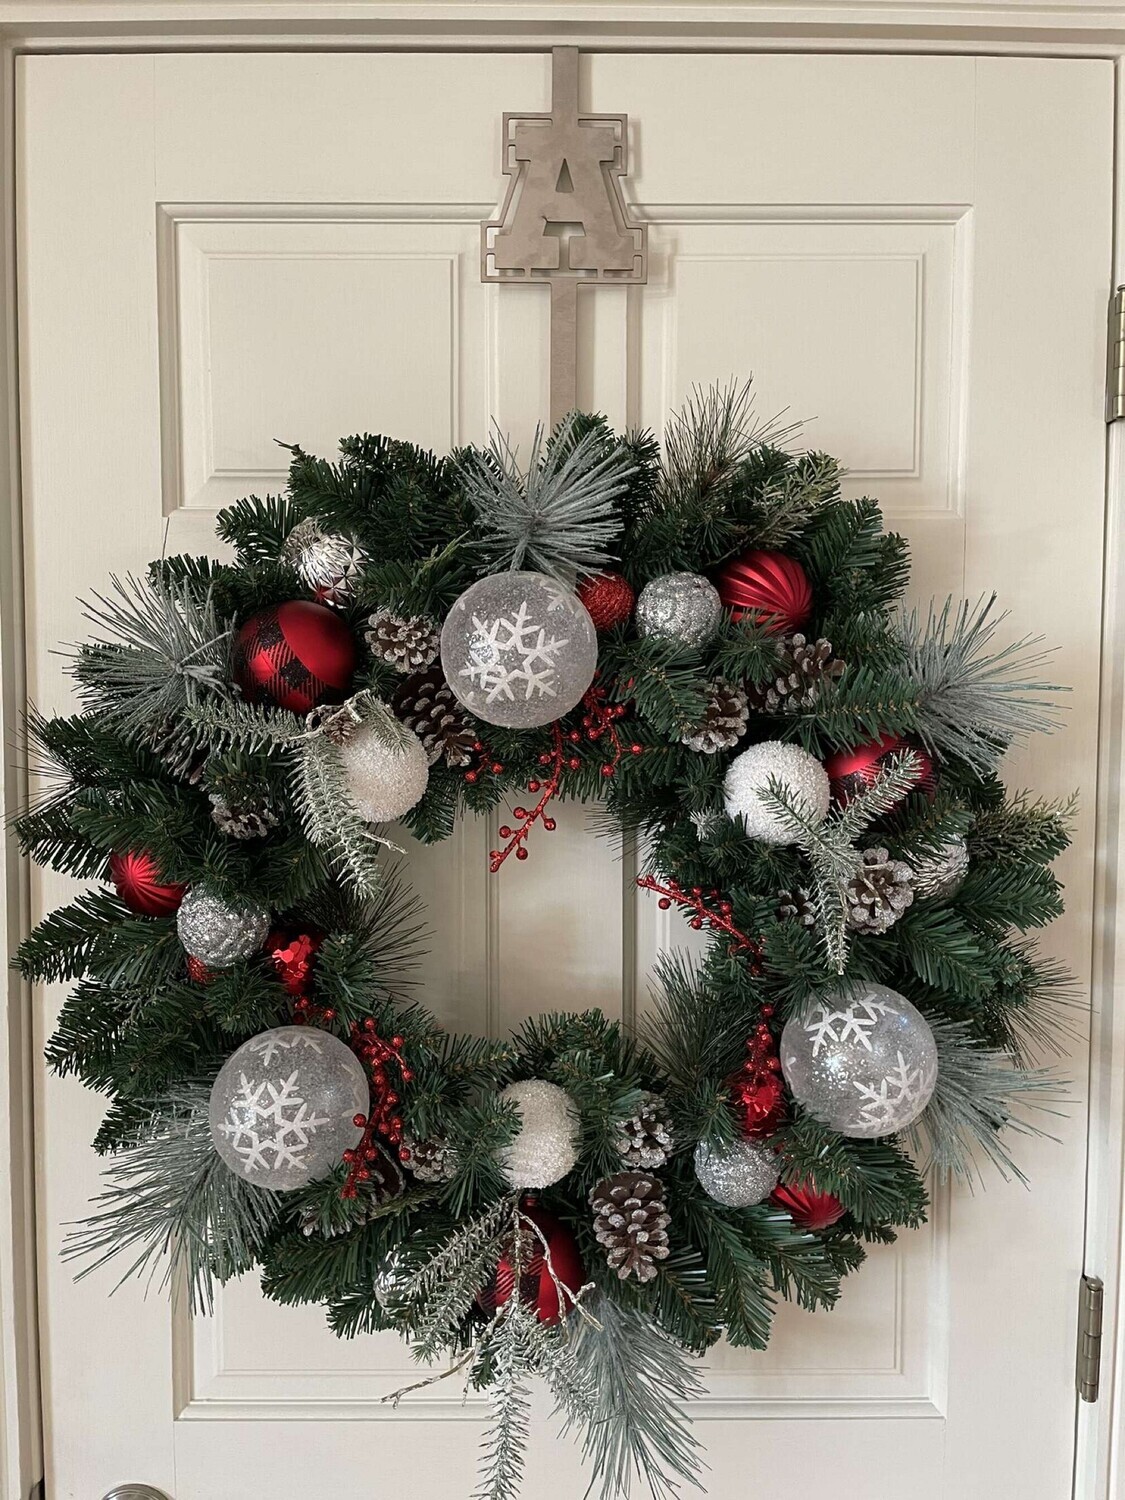 Stainless Steel "A" Wreath Hanger